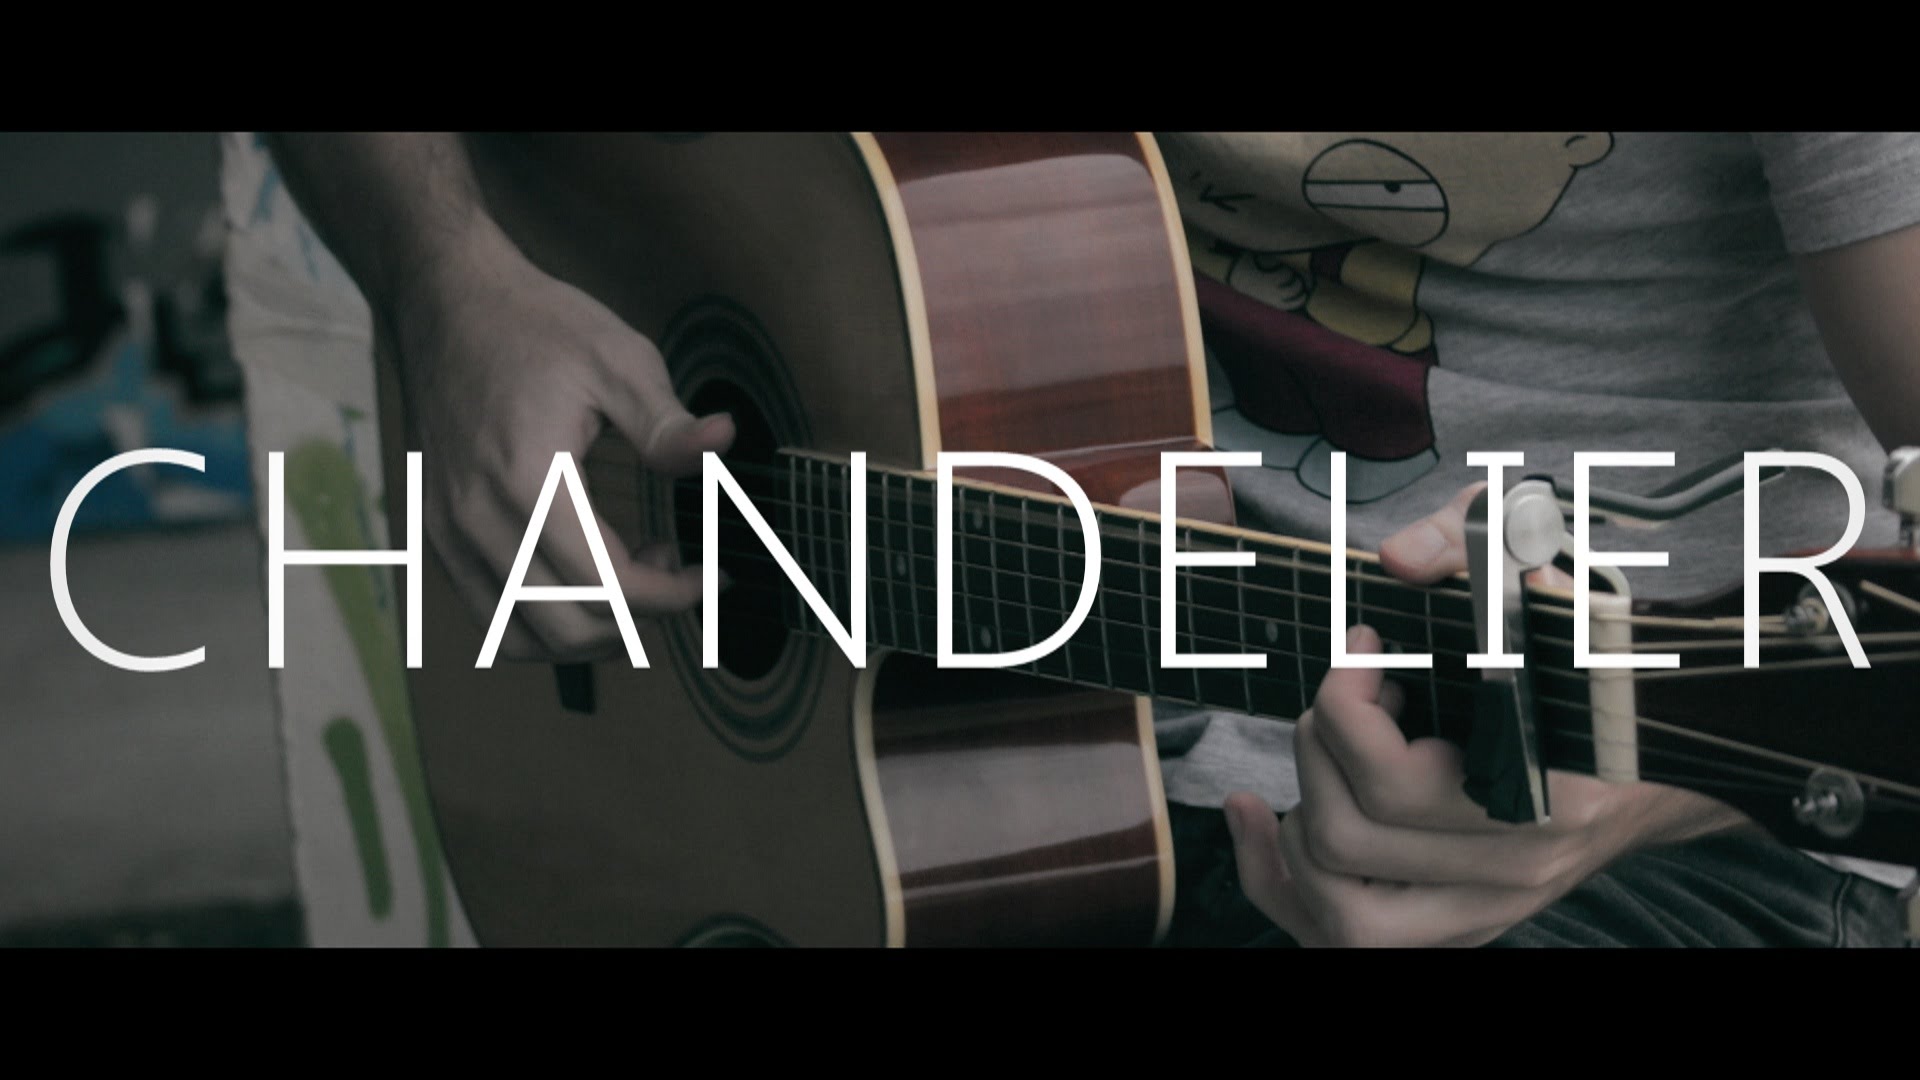 Chandelier - Sia (fingerstyle guitar cover by Peter Gergely) - YouTube